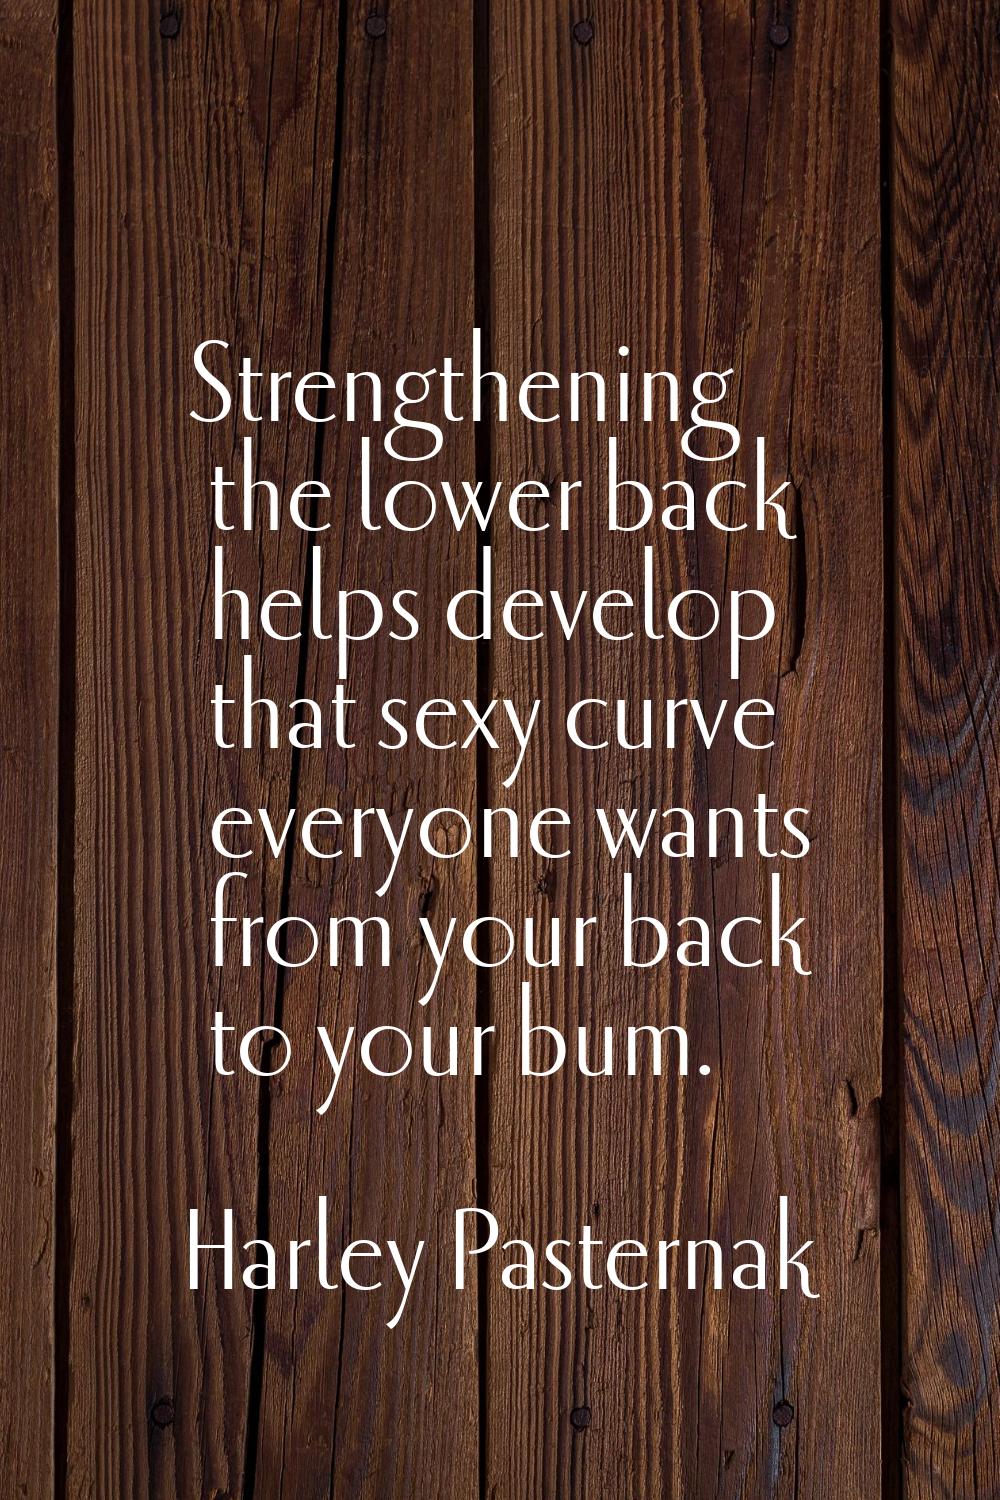 Strengthening the lower back helps develop that sexy curve everyone wants from your back to your bu